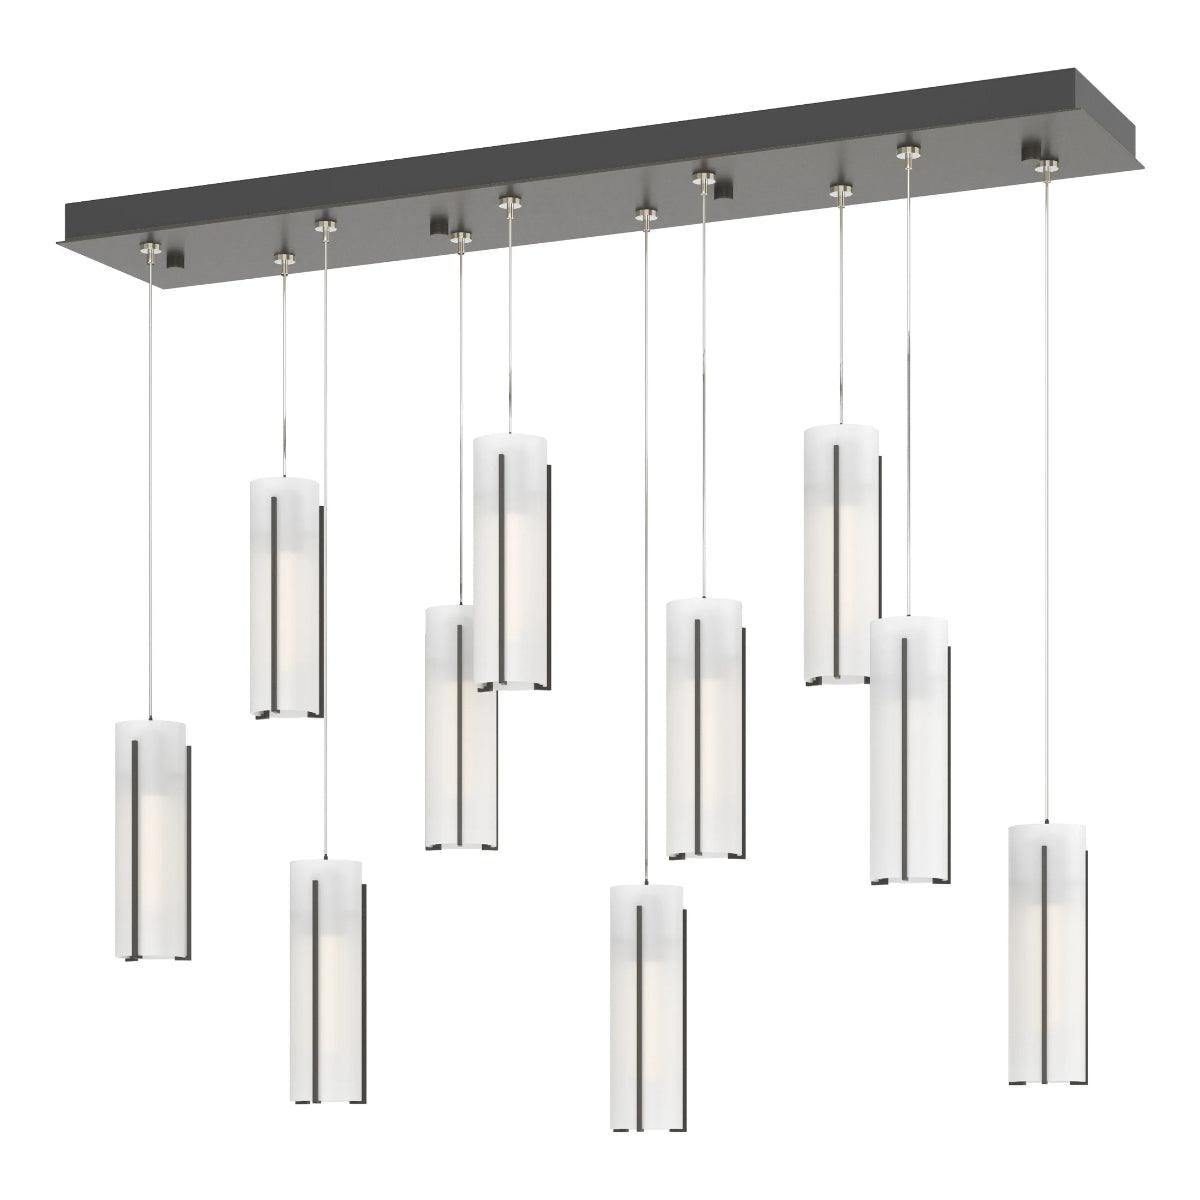 Exos 45 in. 10 Lights Linear Pendant Light with Standard Height